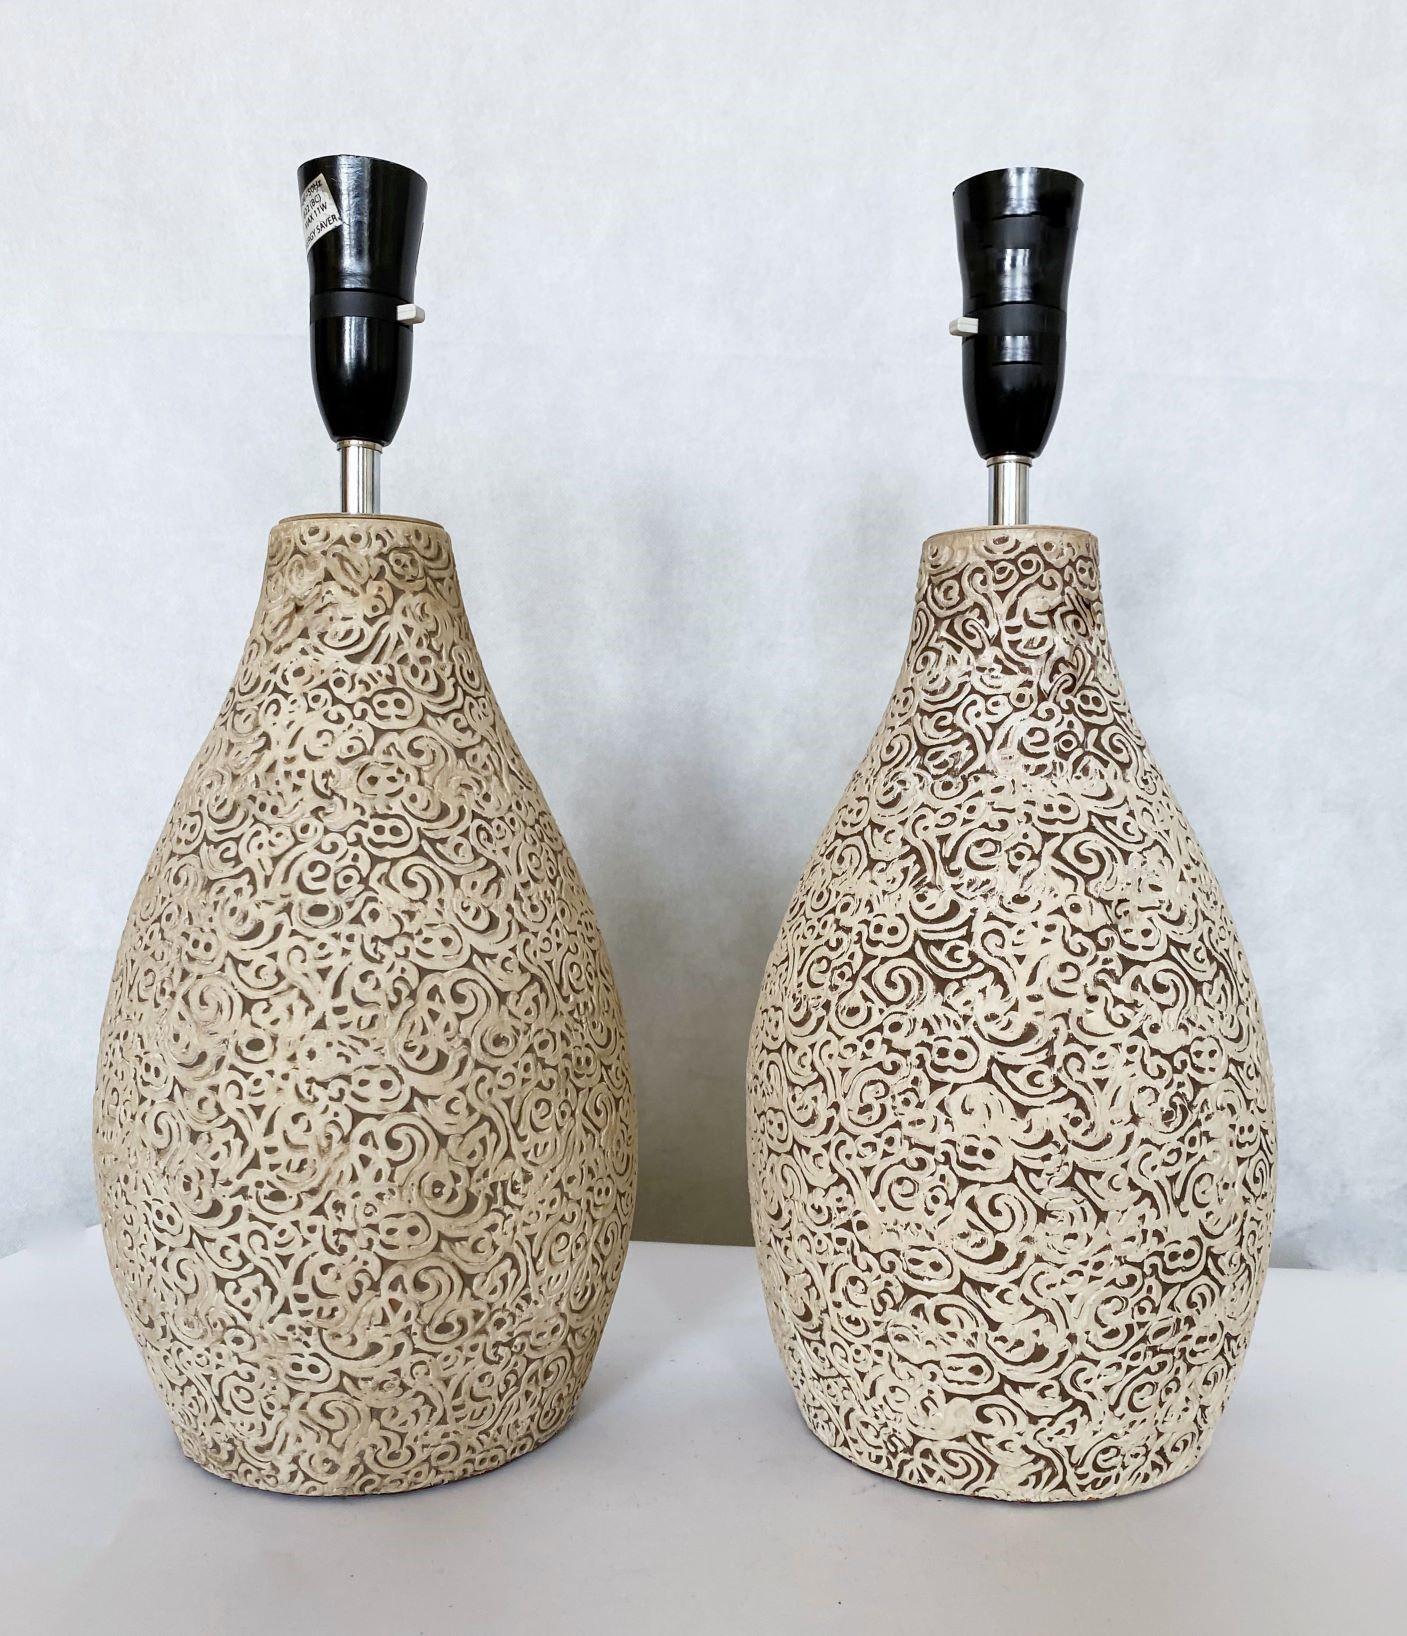 Pair of French Hand-Crafted Ceramic Table Lamps, 1960s For Sale 1